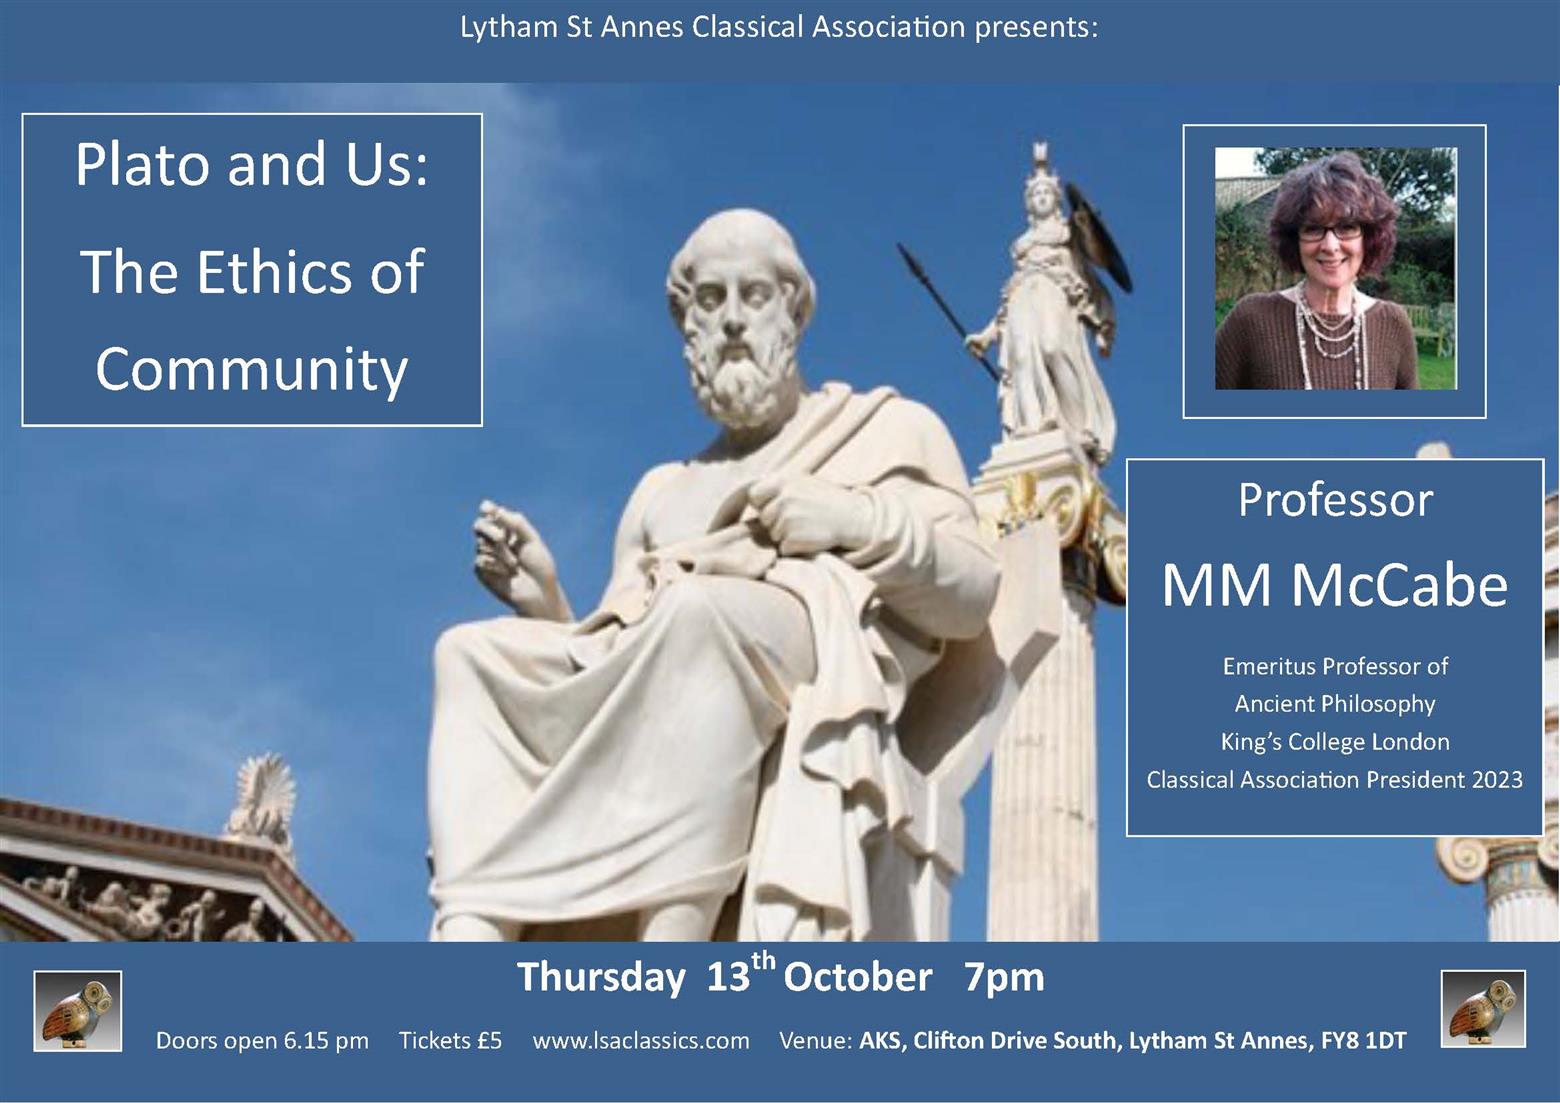 Lytham St Annes Classical Association Lecture - Plato and Us: The Ethics of Community